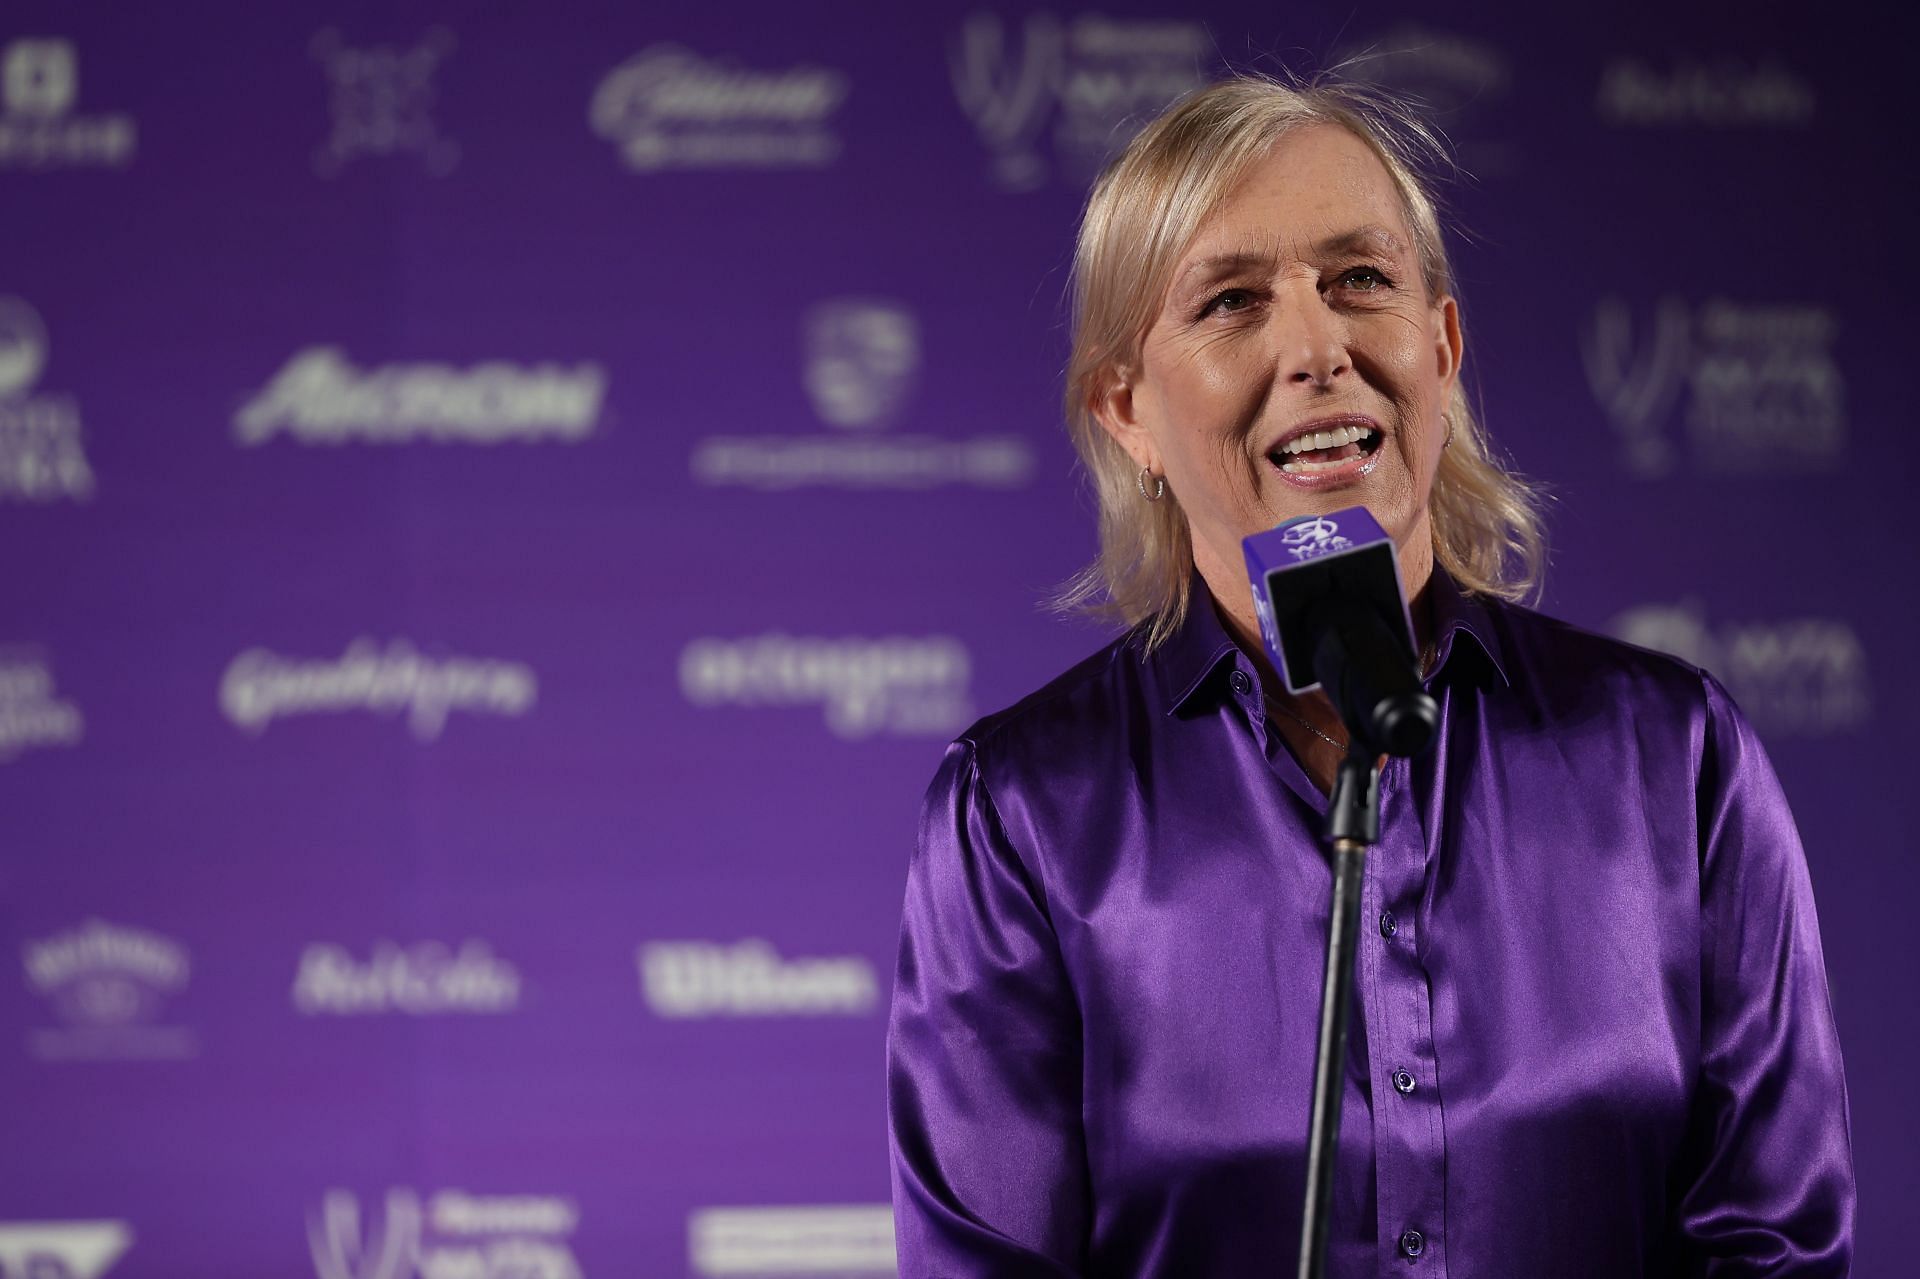 Martina Navratilova is fighting cancer for the second time.